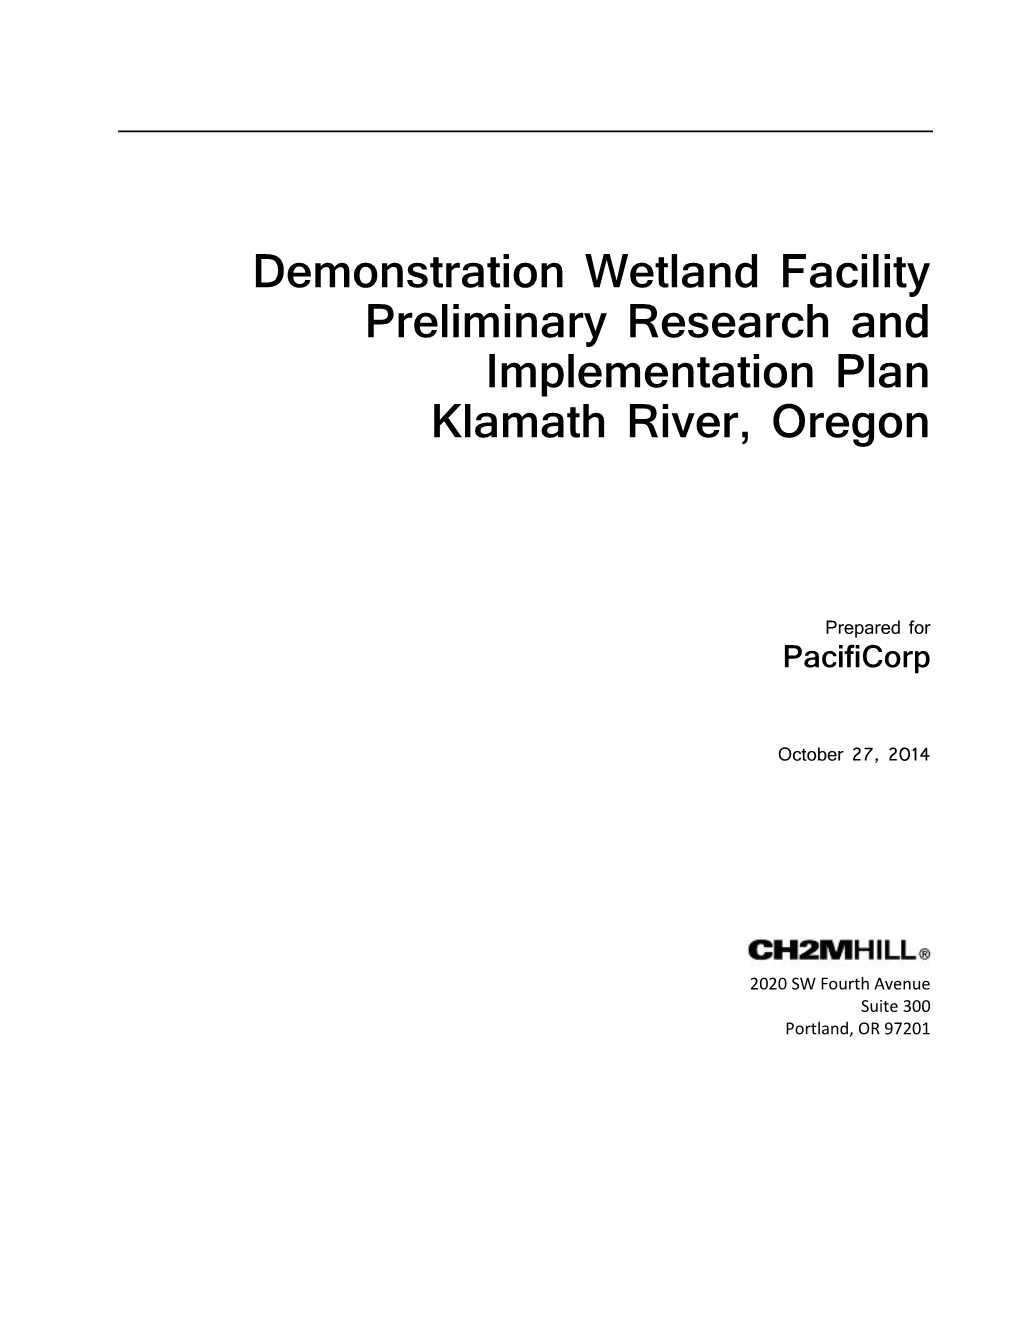 Demonstration Wetland Facility Preliminary Research and Implementation Plan, Klamath River, Oregon